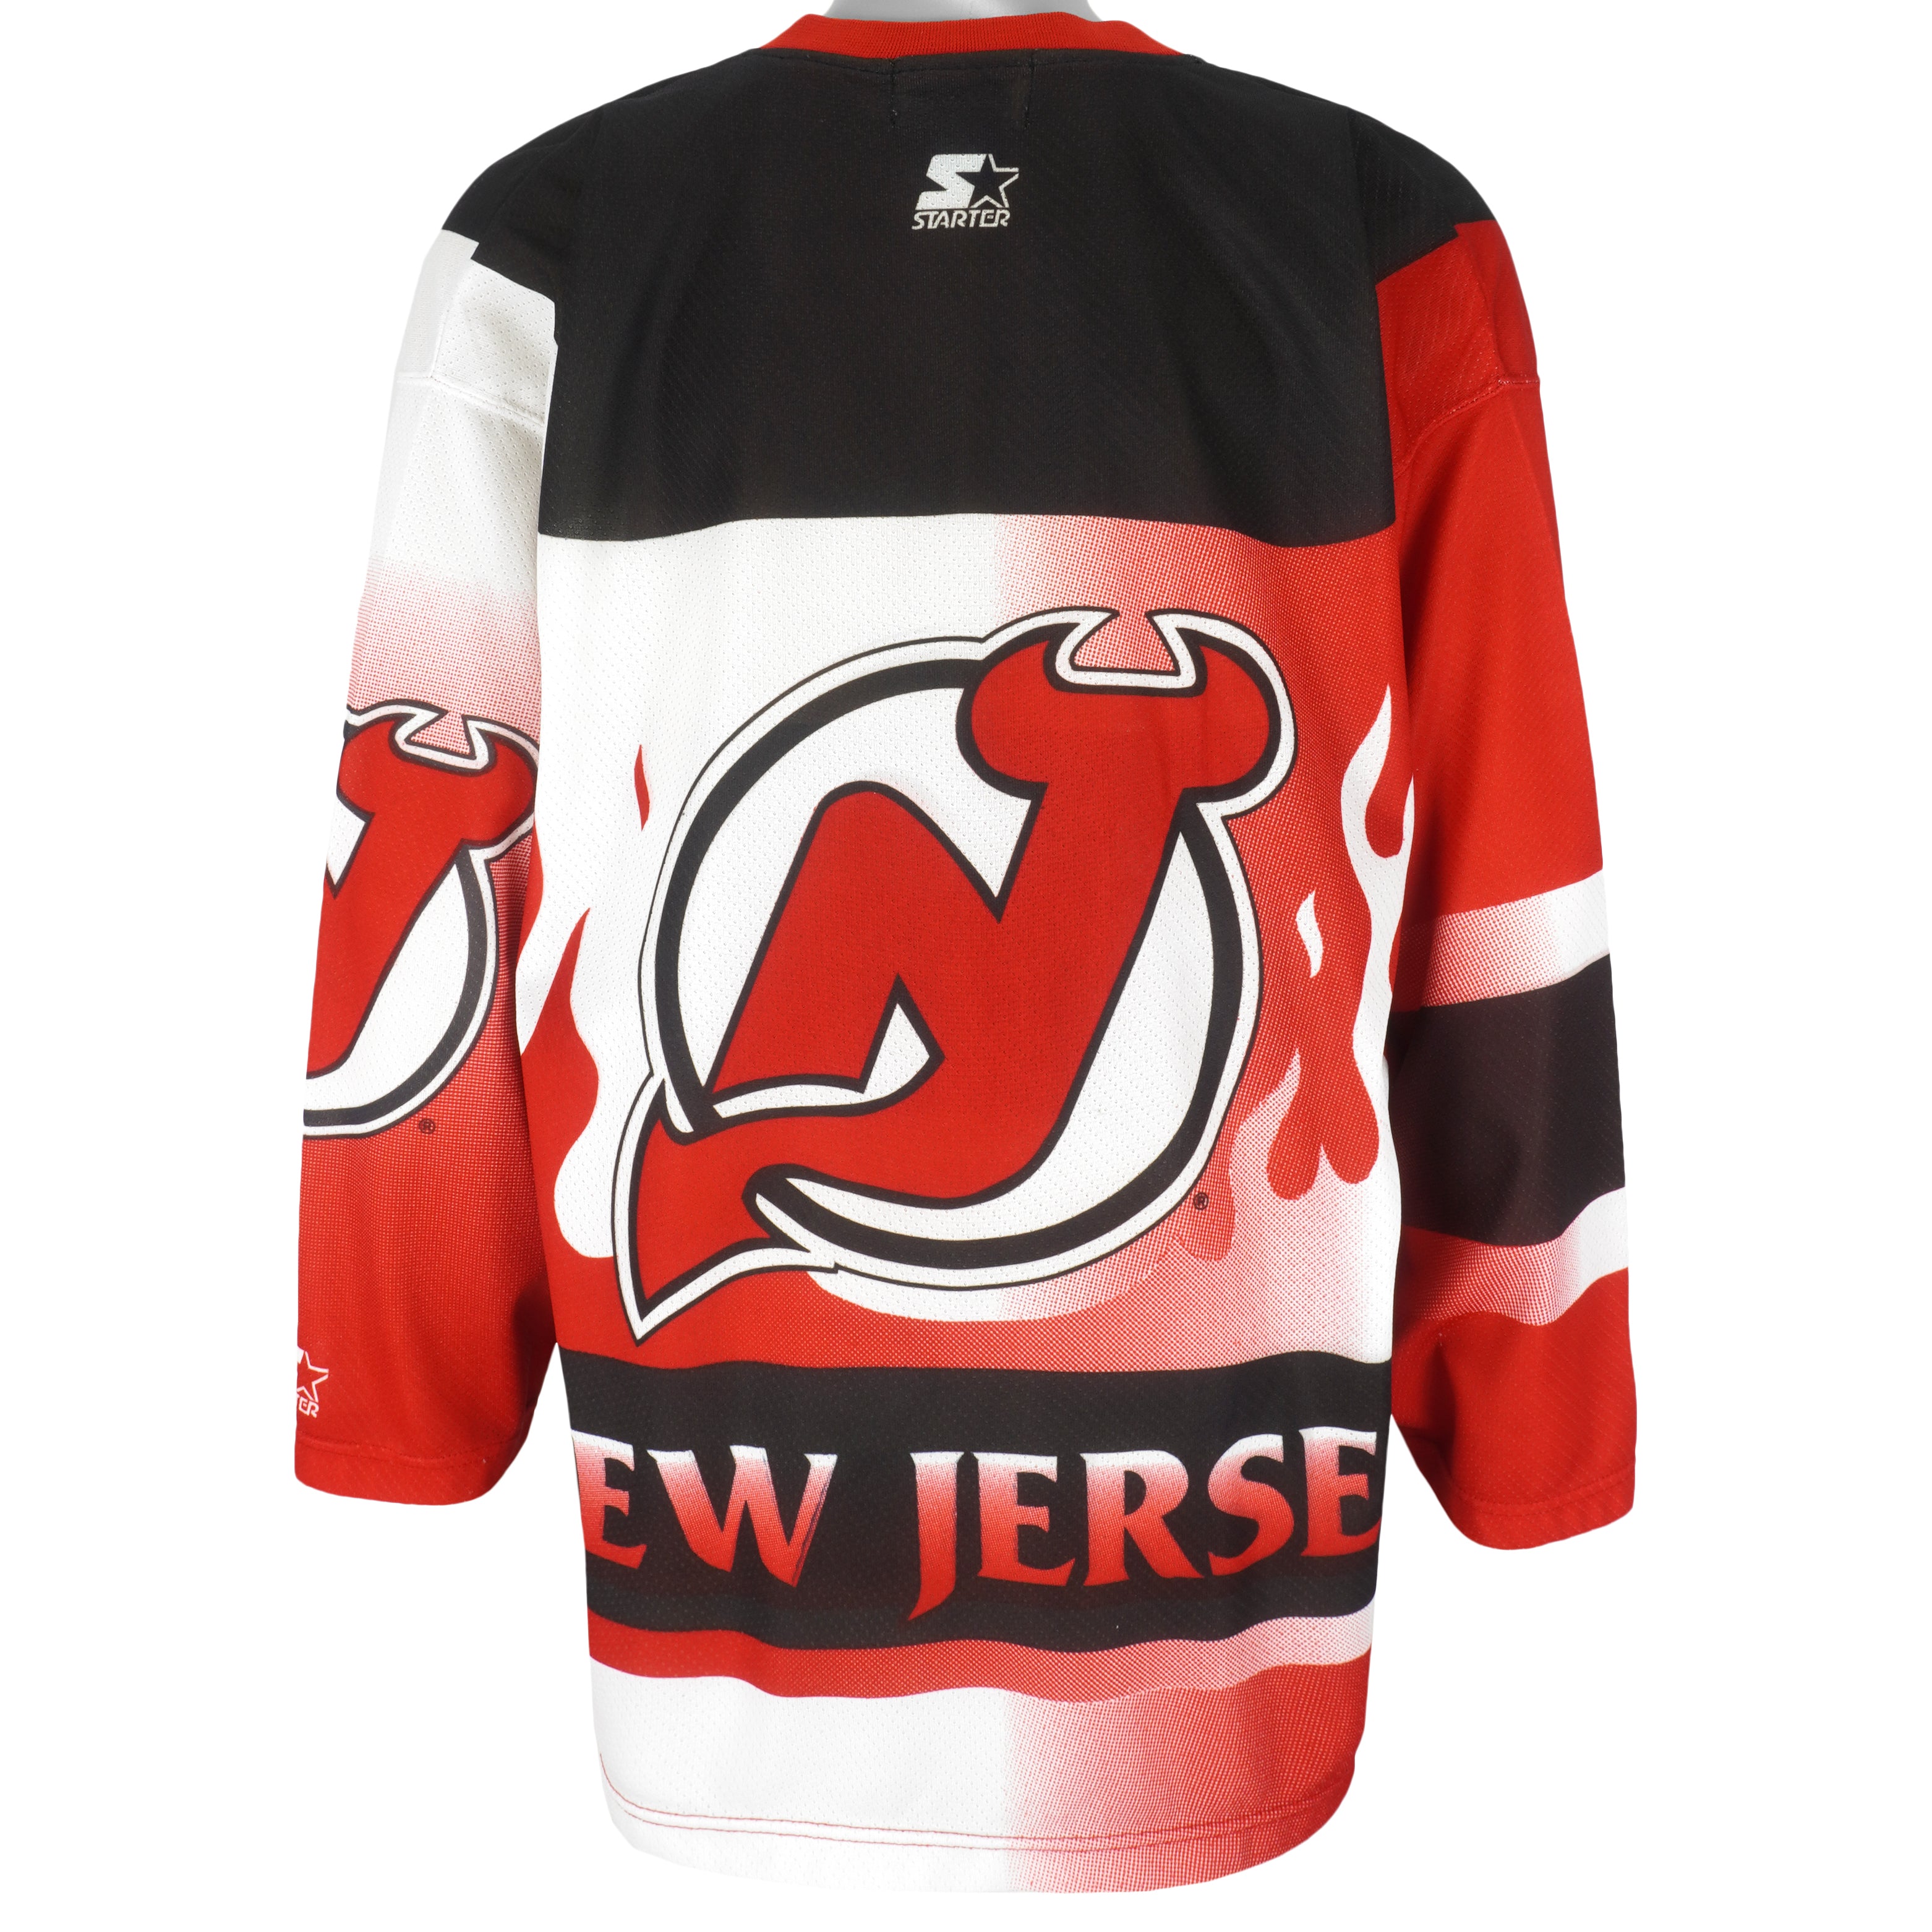 Game Jersey - New Jersey Devils - Red Adidas Size 50 - Pro Stock Hockey